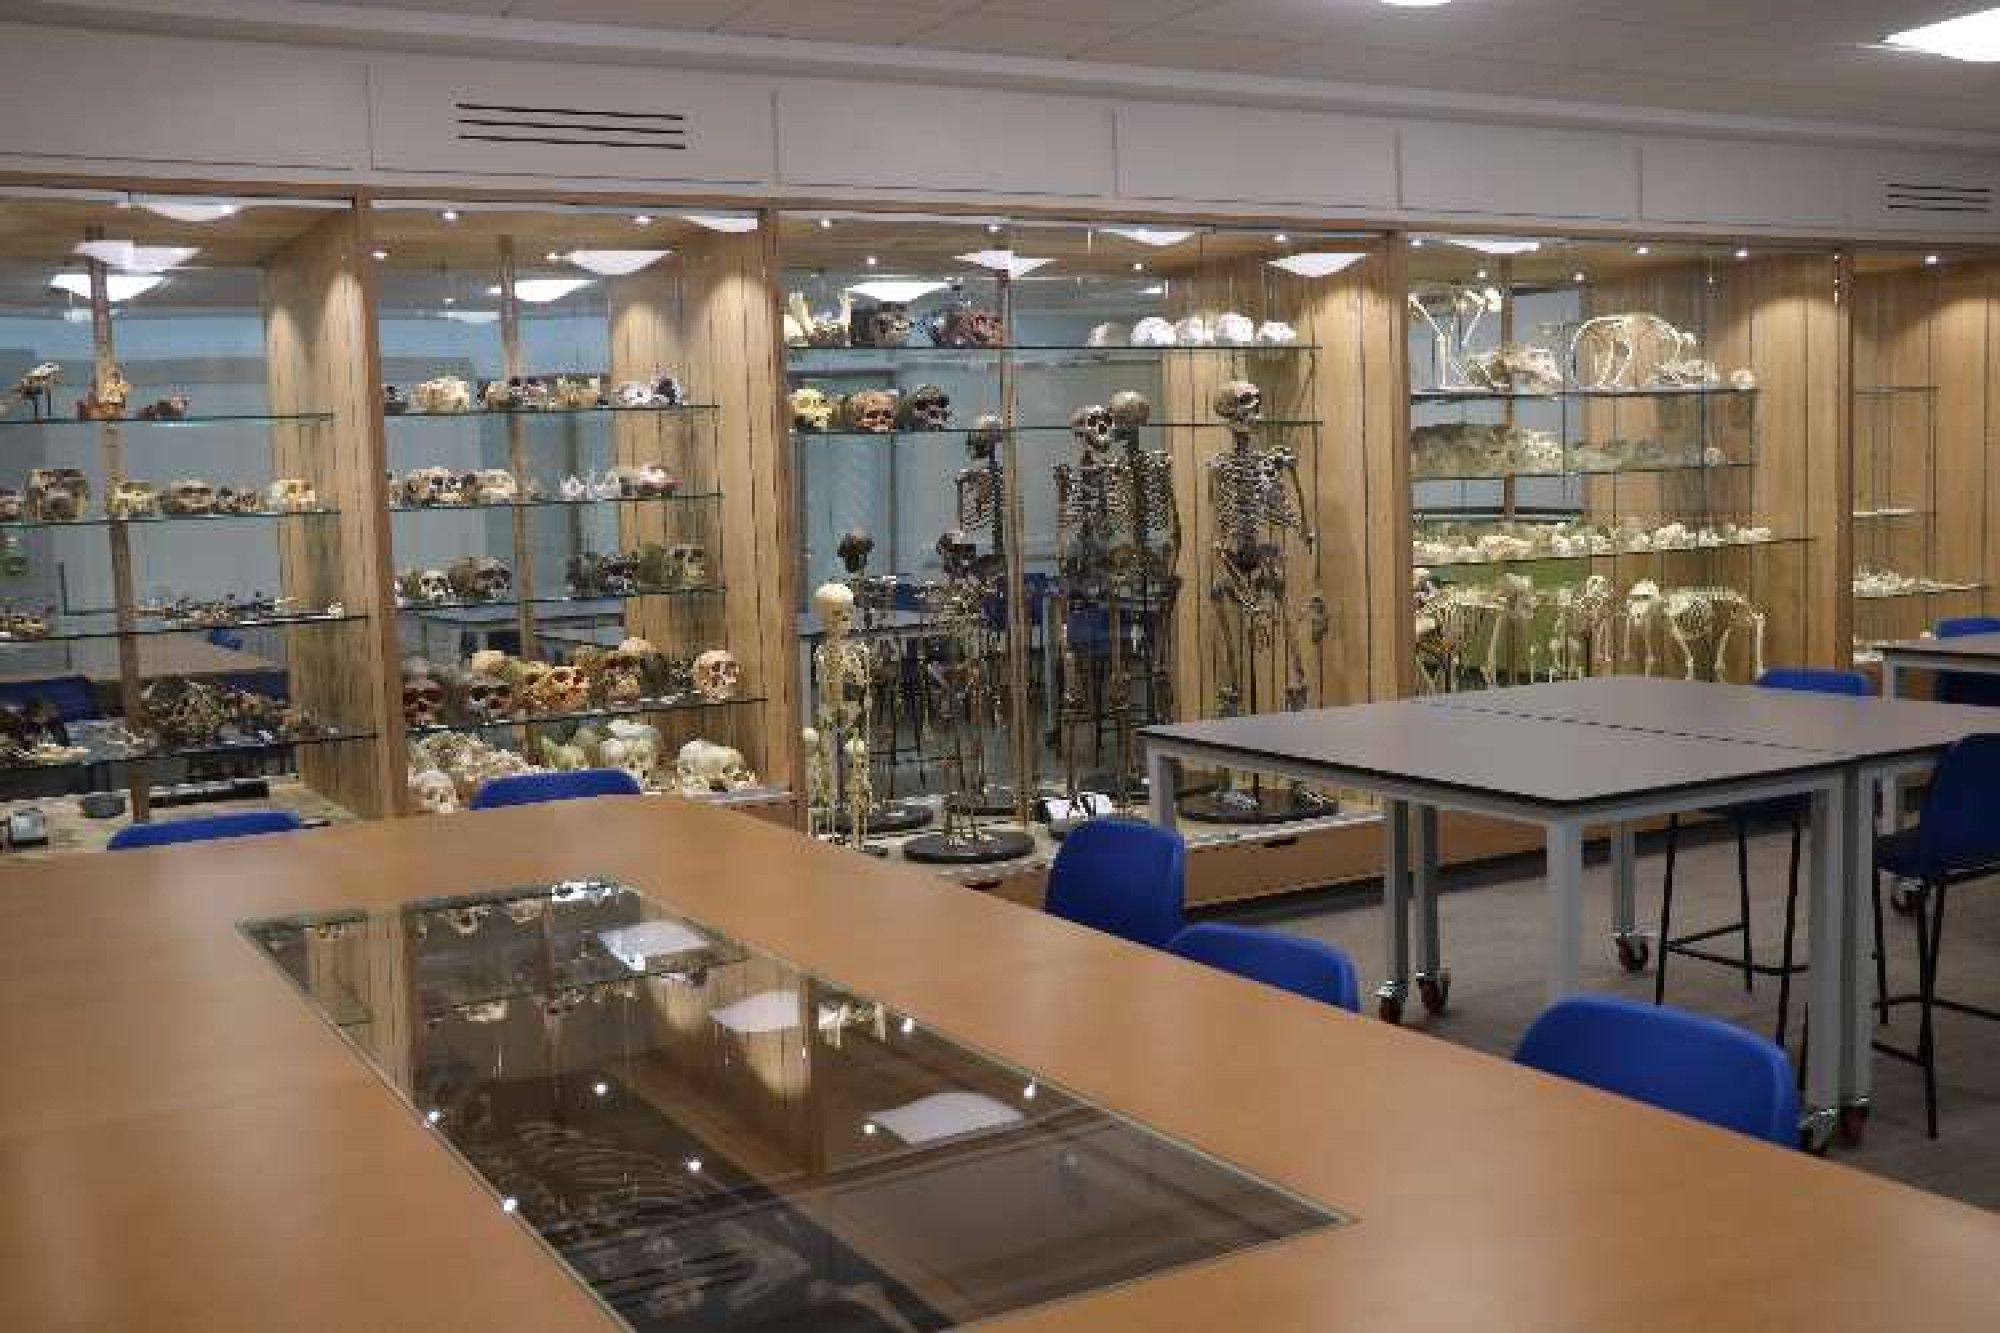 Display cases containing fossil casts of primate and hominim skeletons